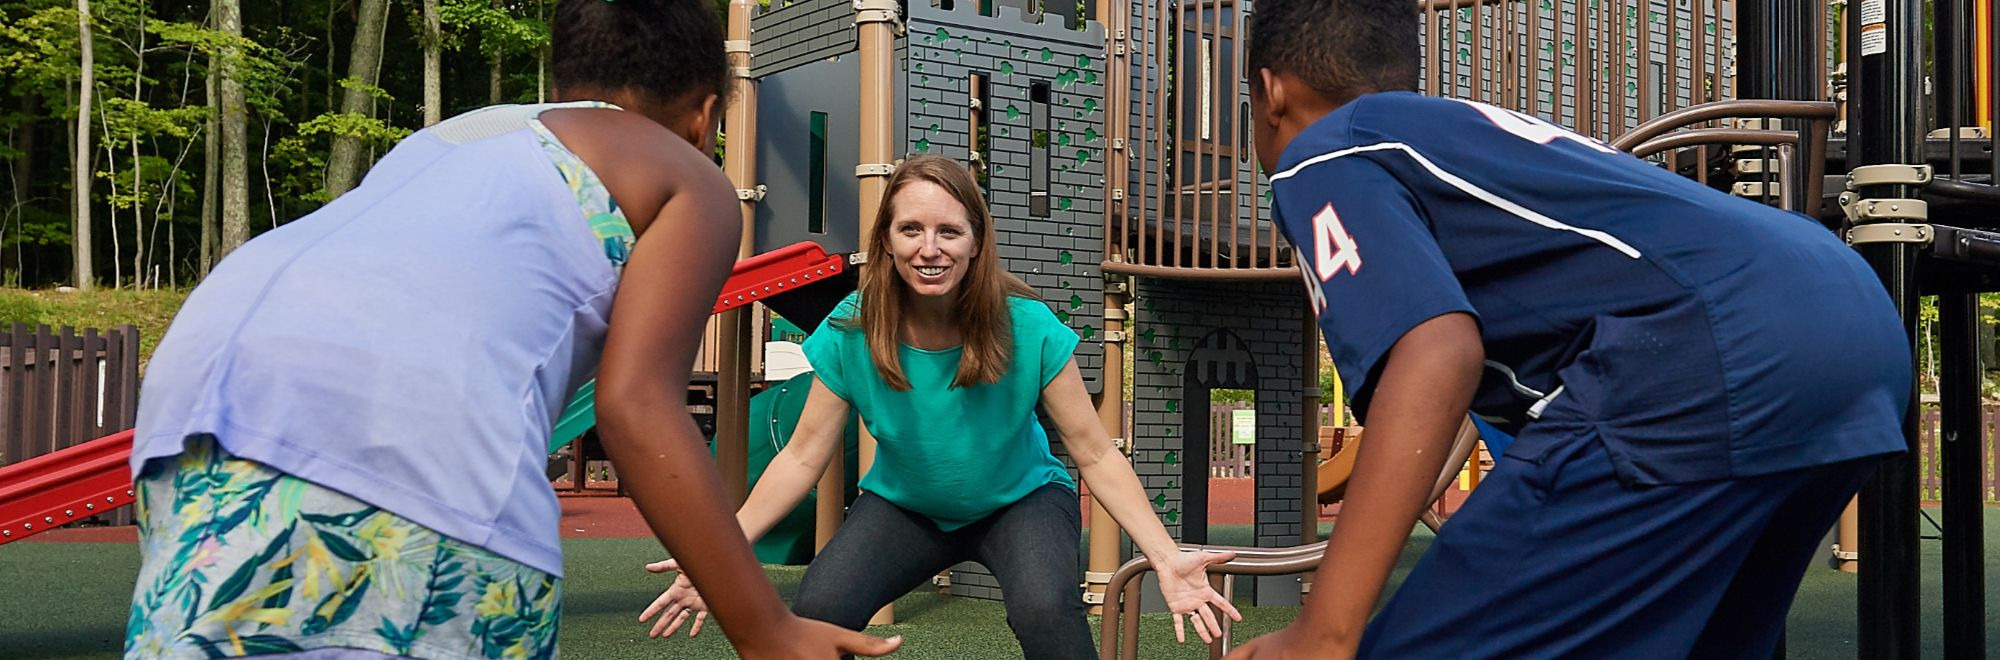 Lindsay Distefano, associate professor of kinesiology,shows children how to exercise on a playground at the Mansfield Community Center